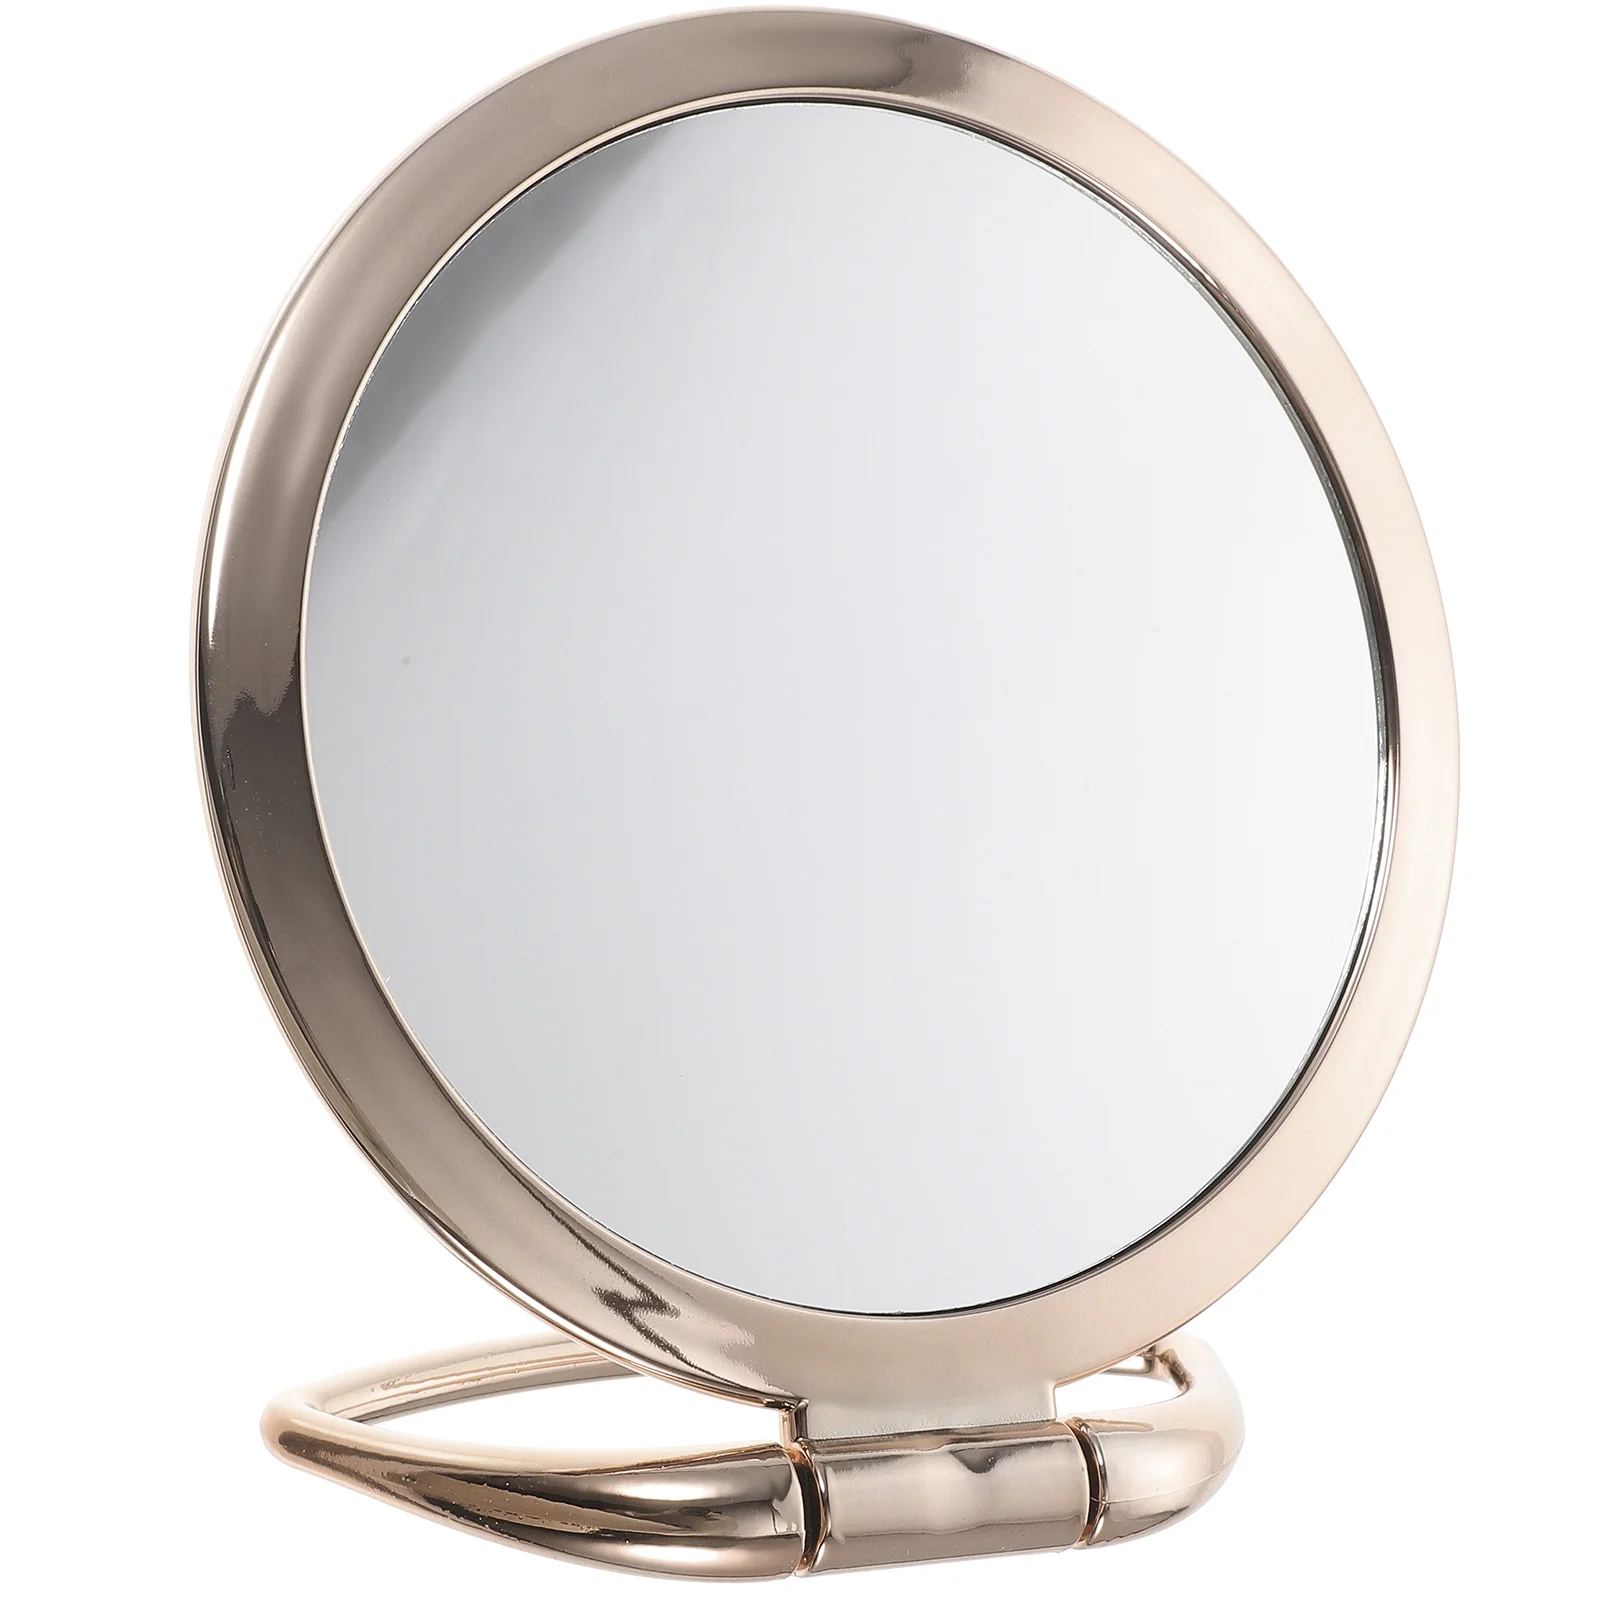 

Handheld Mirror Double Sided Folding Women Tabletop Mirrors Magnifier Bedroom Plastic Makeup Student